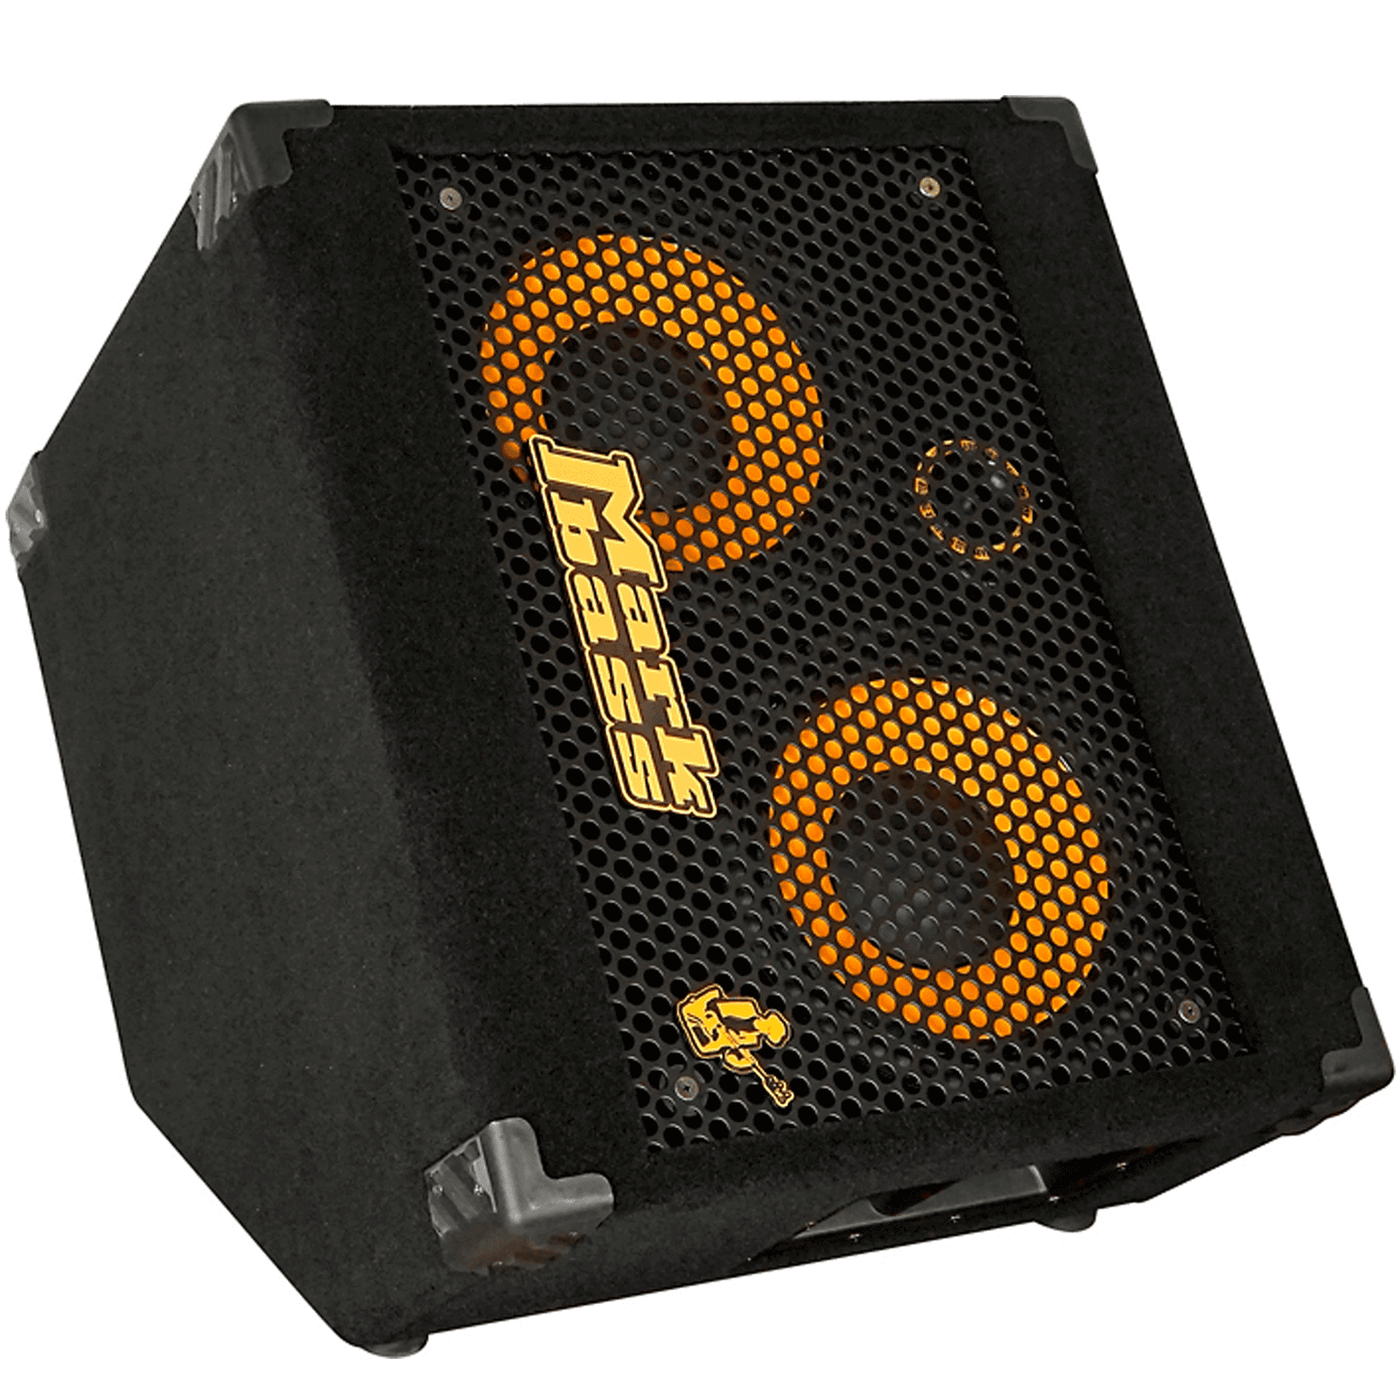 Markbass Marcus Miller 102 - "My signature Markbass cabinets have a really fat low end thanks to the rear-ported design - and the highs are ultra focused thanks to brand new 1 inch "Voice Coil" tweeter. Also the angled cabinet design allows me to use thes